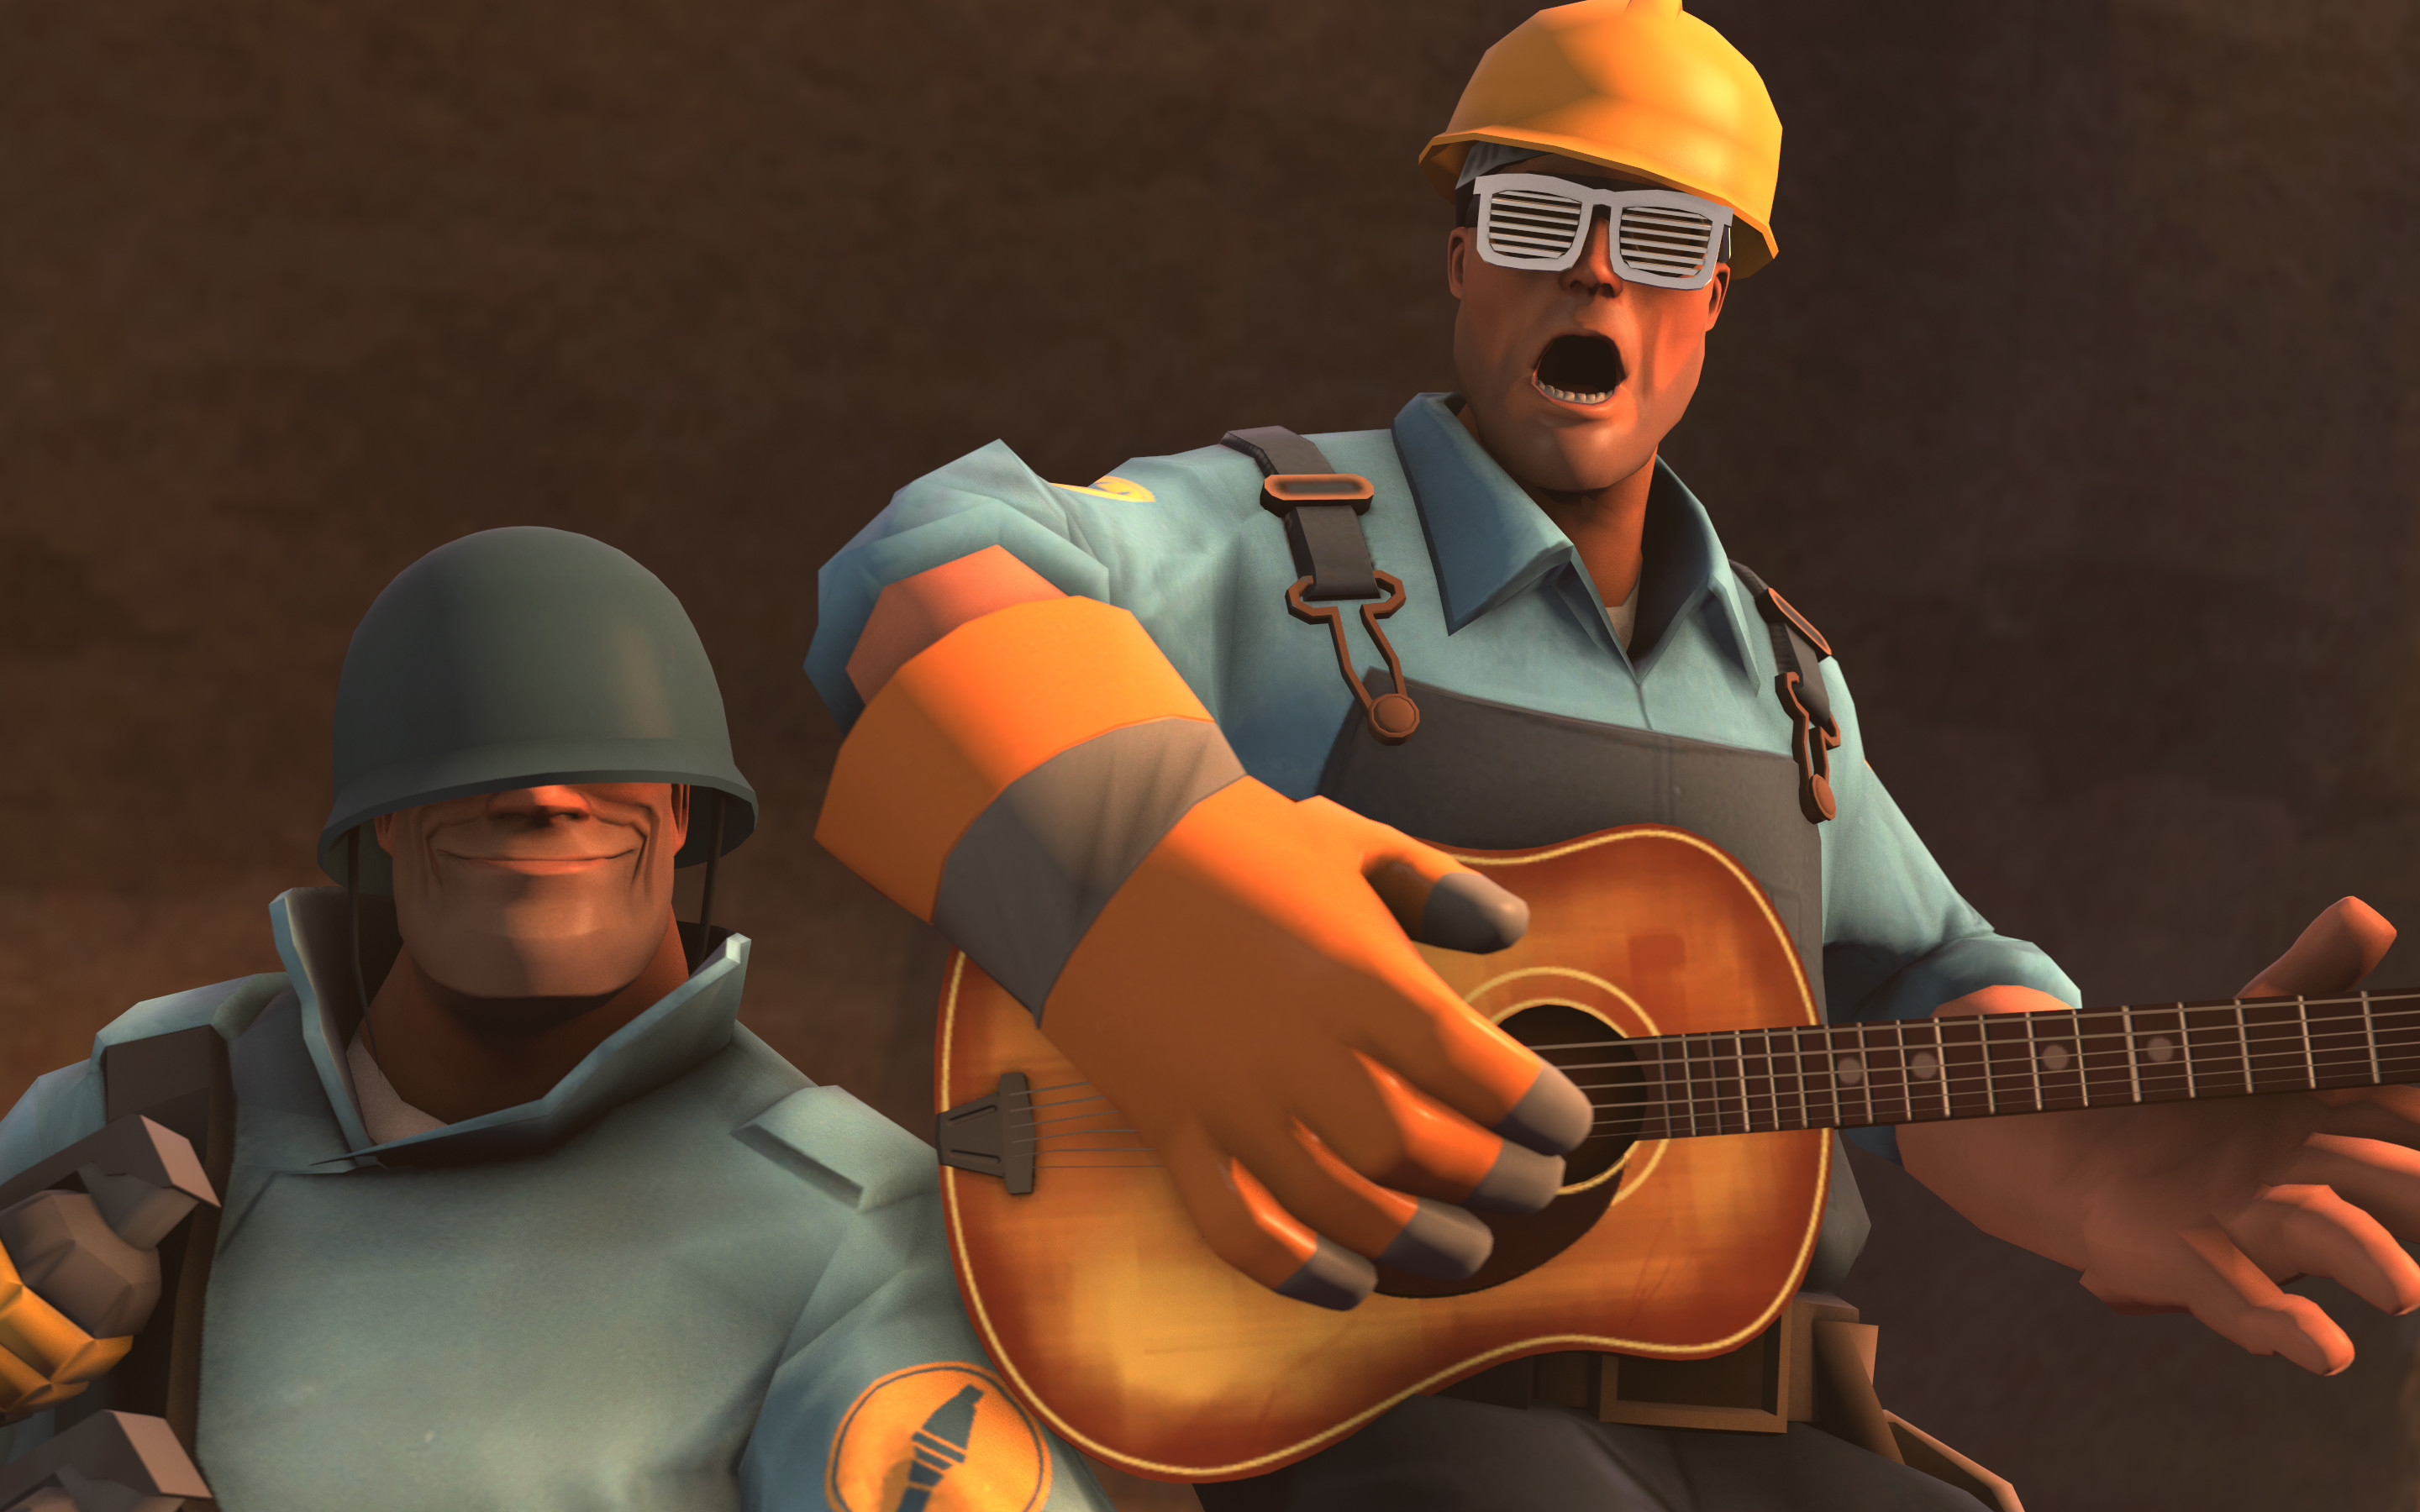 2880x1800 Team Fortress 2(TF2) images team fortress 2 wallpaper soldier and engineer  HD wallpaper and background photos